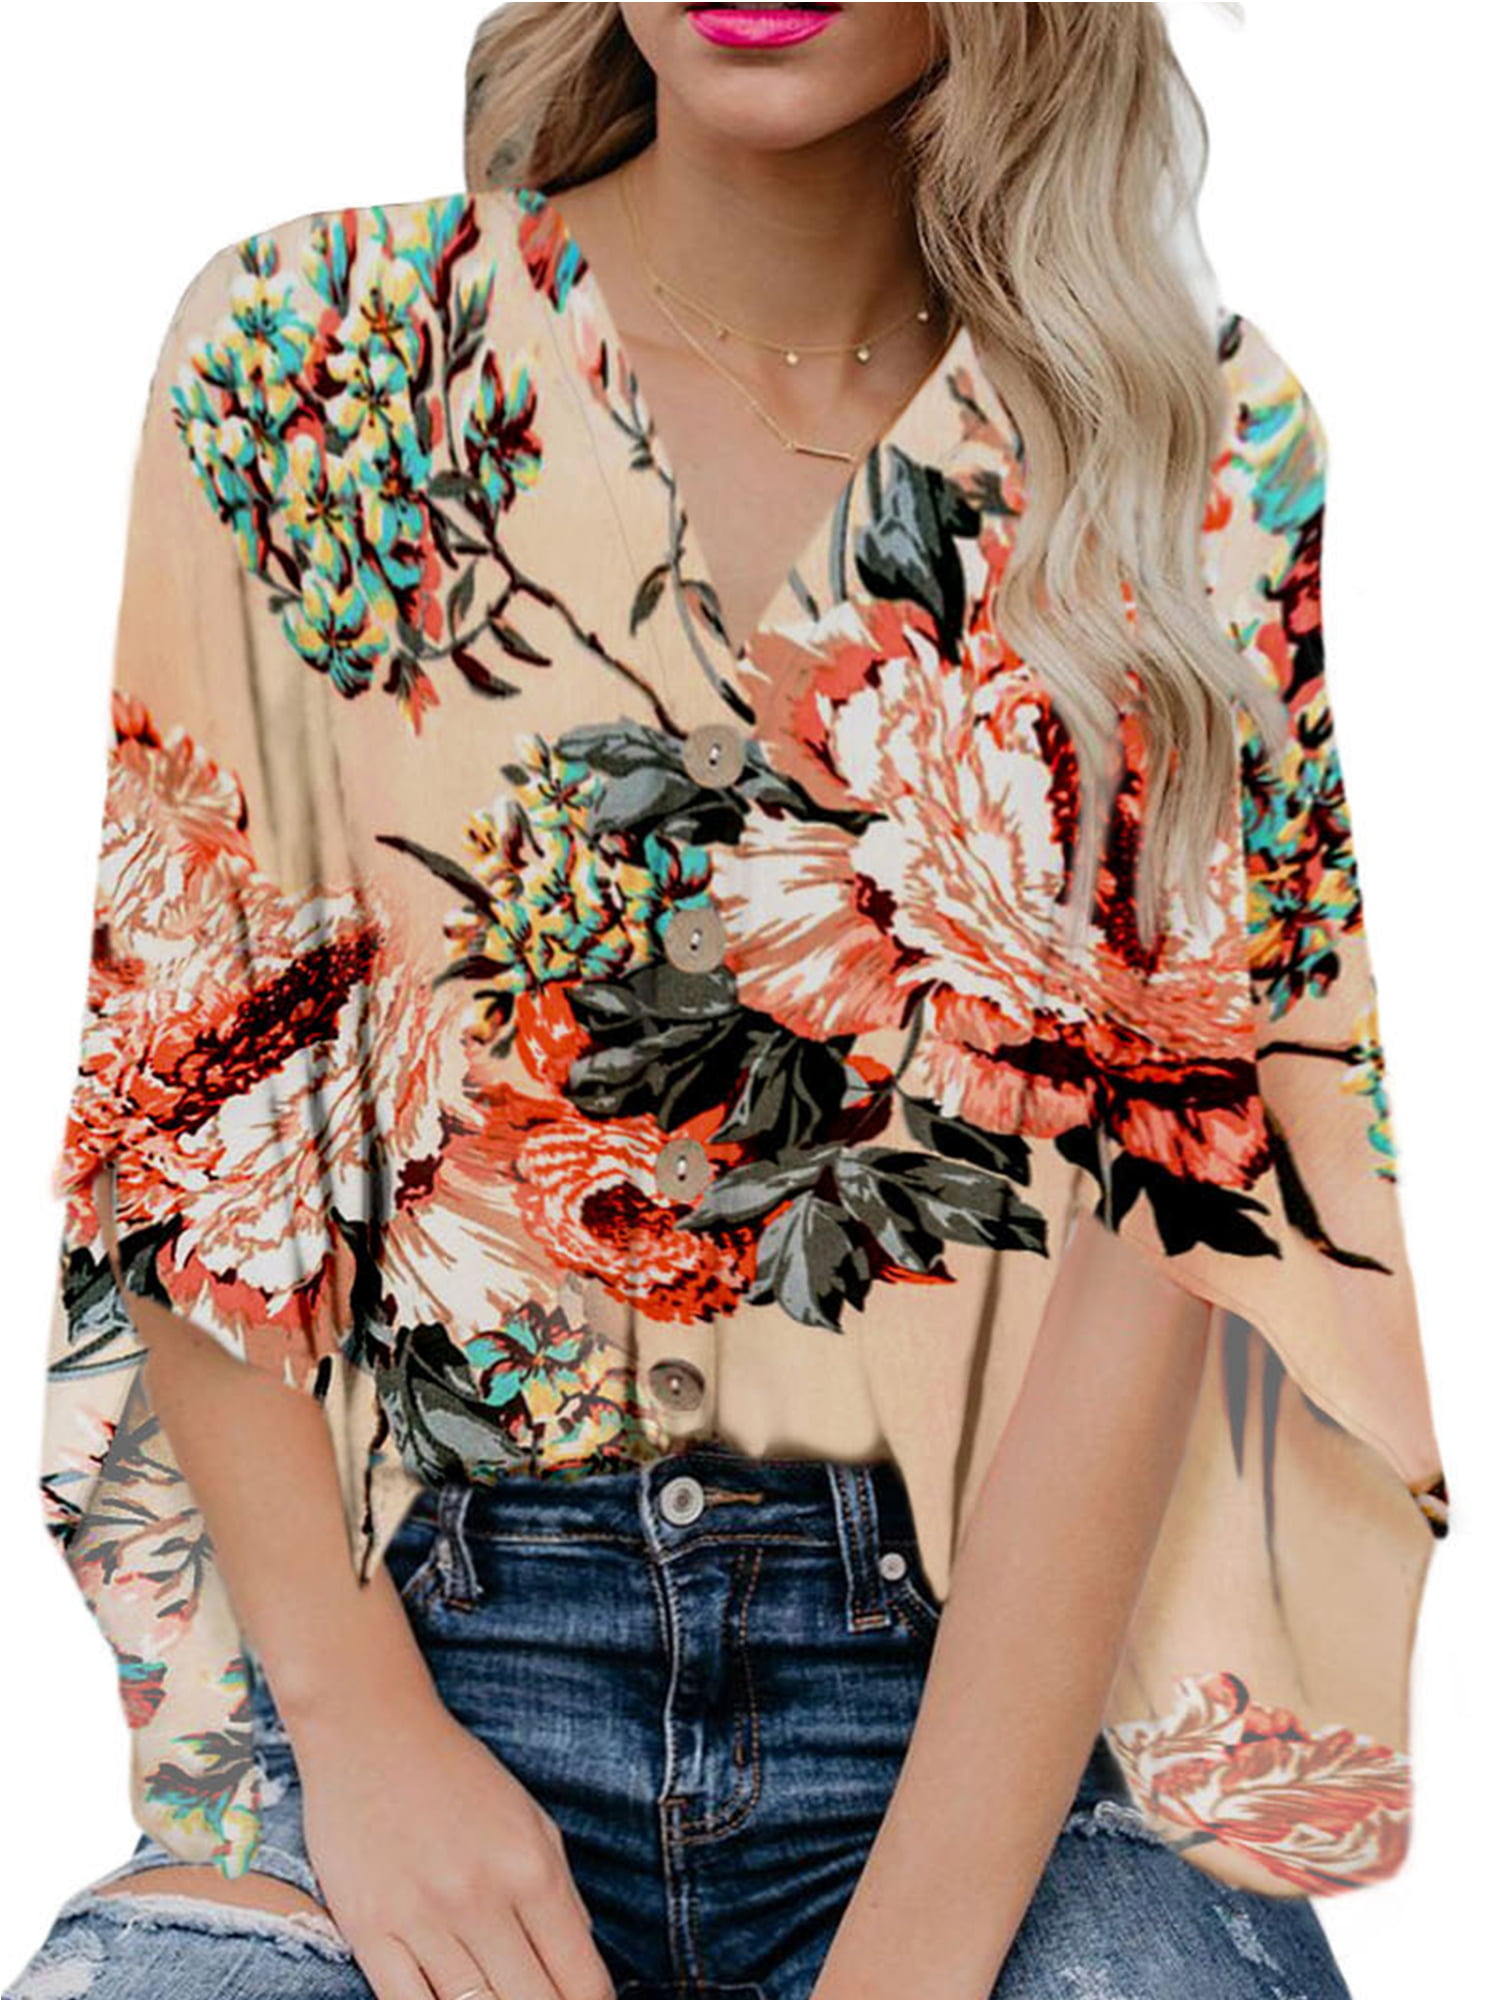 Women V Neck Floral Print Casual Loose Tie Knot Chiffon Tops Short Sleeve Blouse 